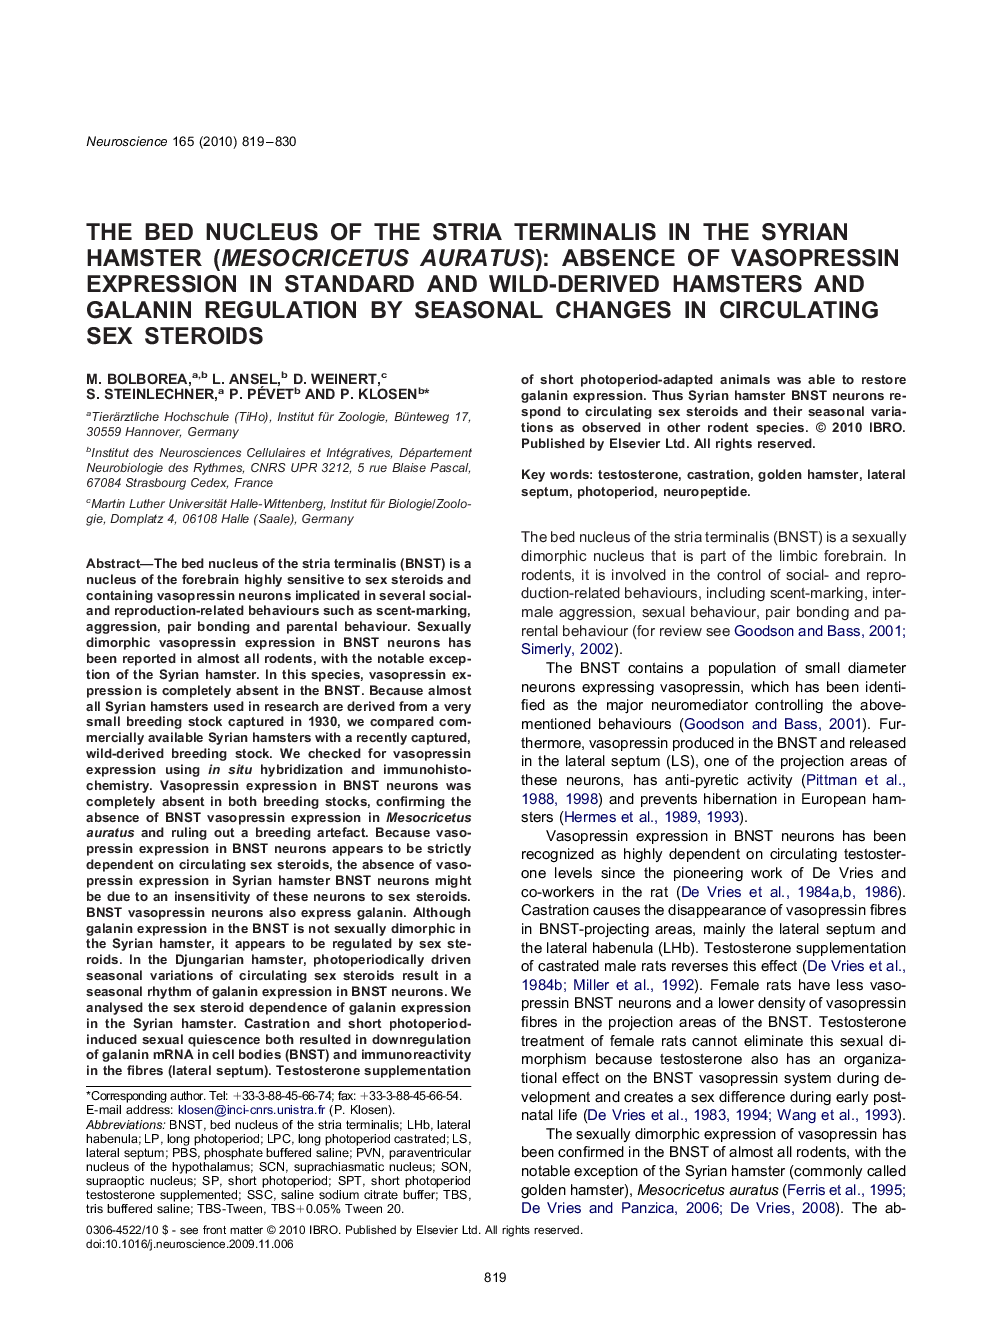 The bed nucleus of the stria terminalis in the Syrian hamster (Mesocricetus auratus): absence of vasopressin expression in standard and wild-derived hamsters and galanin regulation by seasonal changes in circulating sex steroids